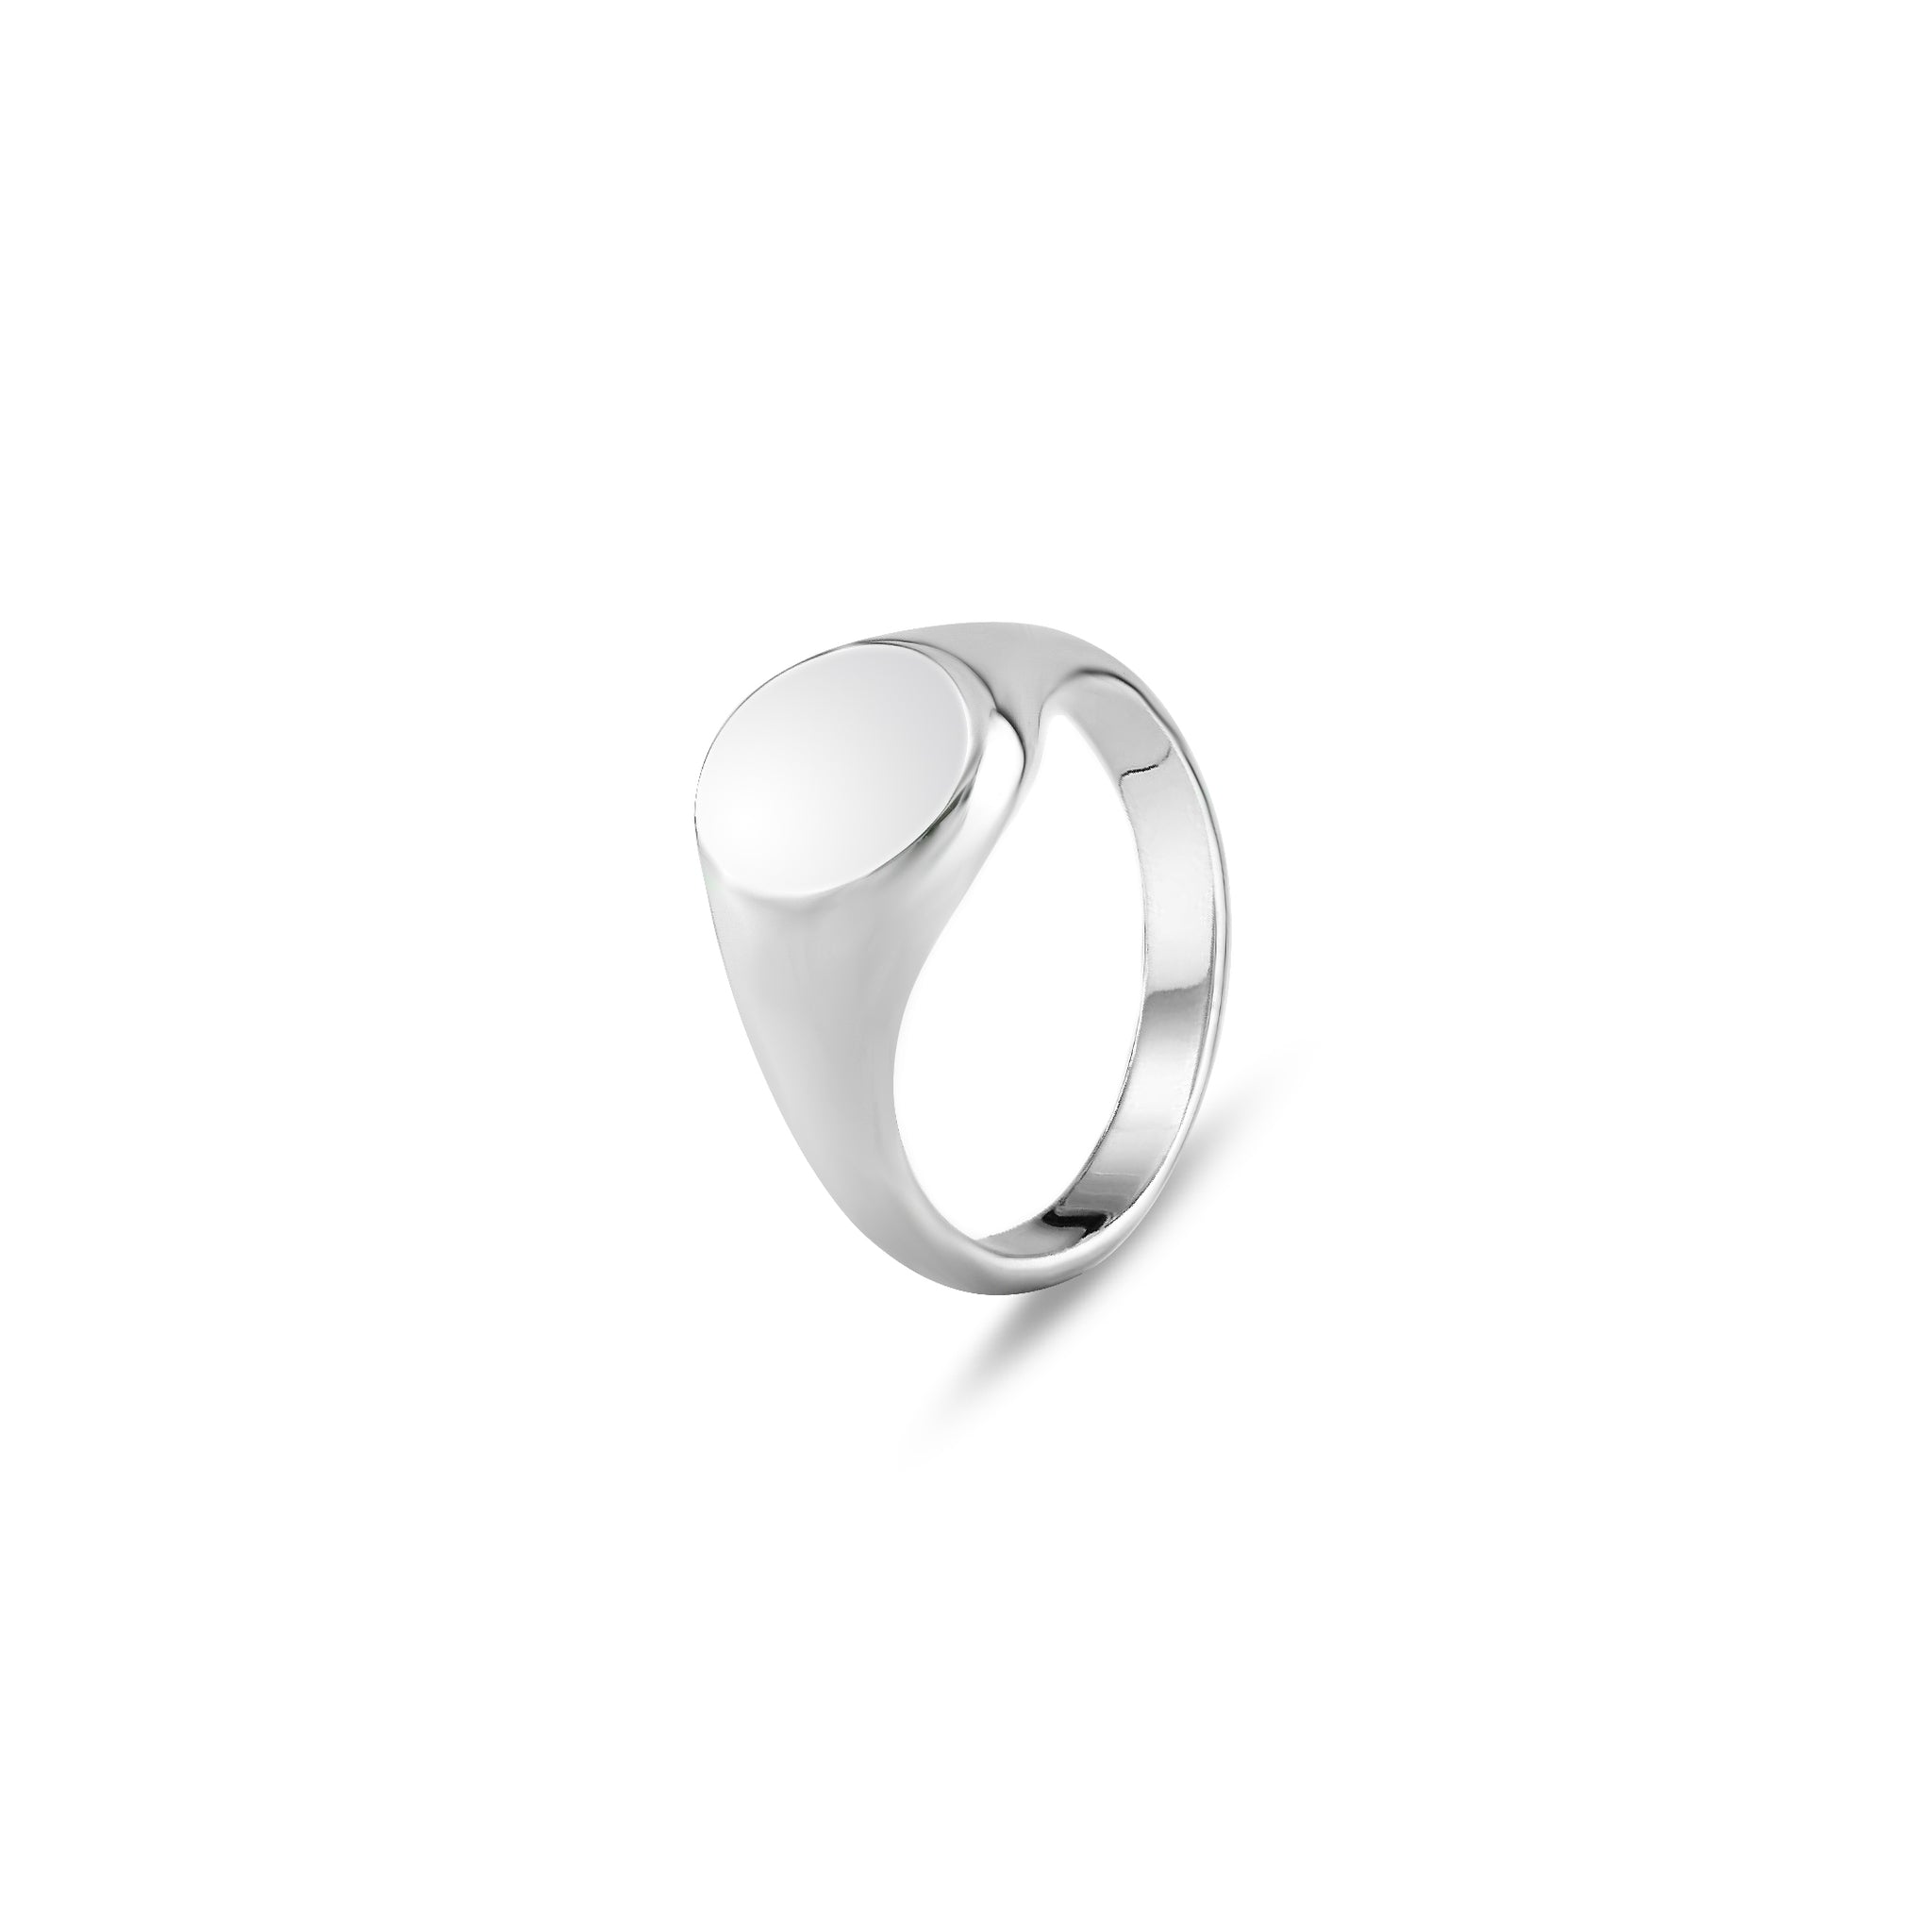 18ct White Gold 11 x 9mm Oval Signet Ring